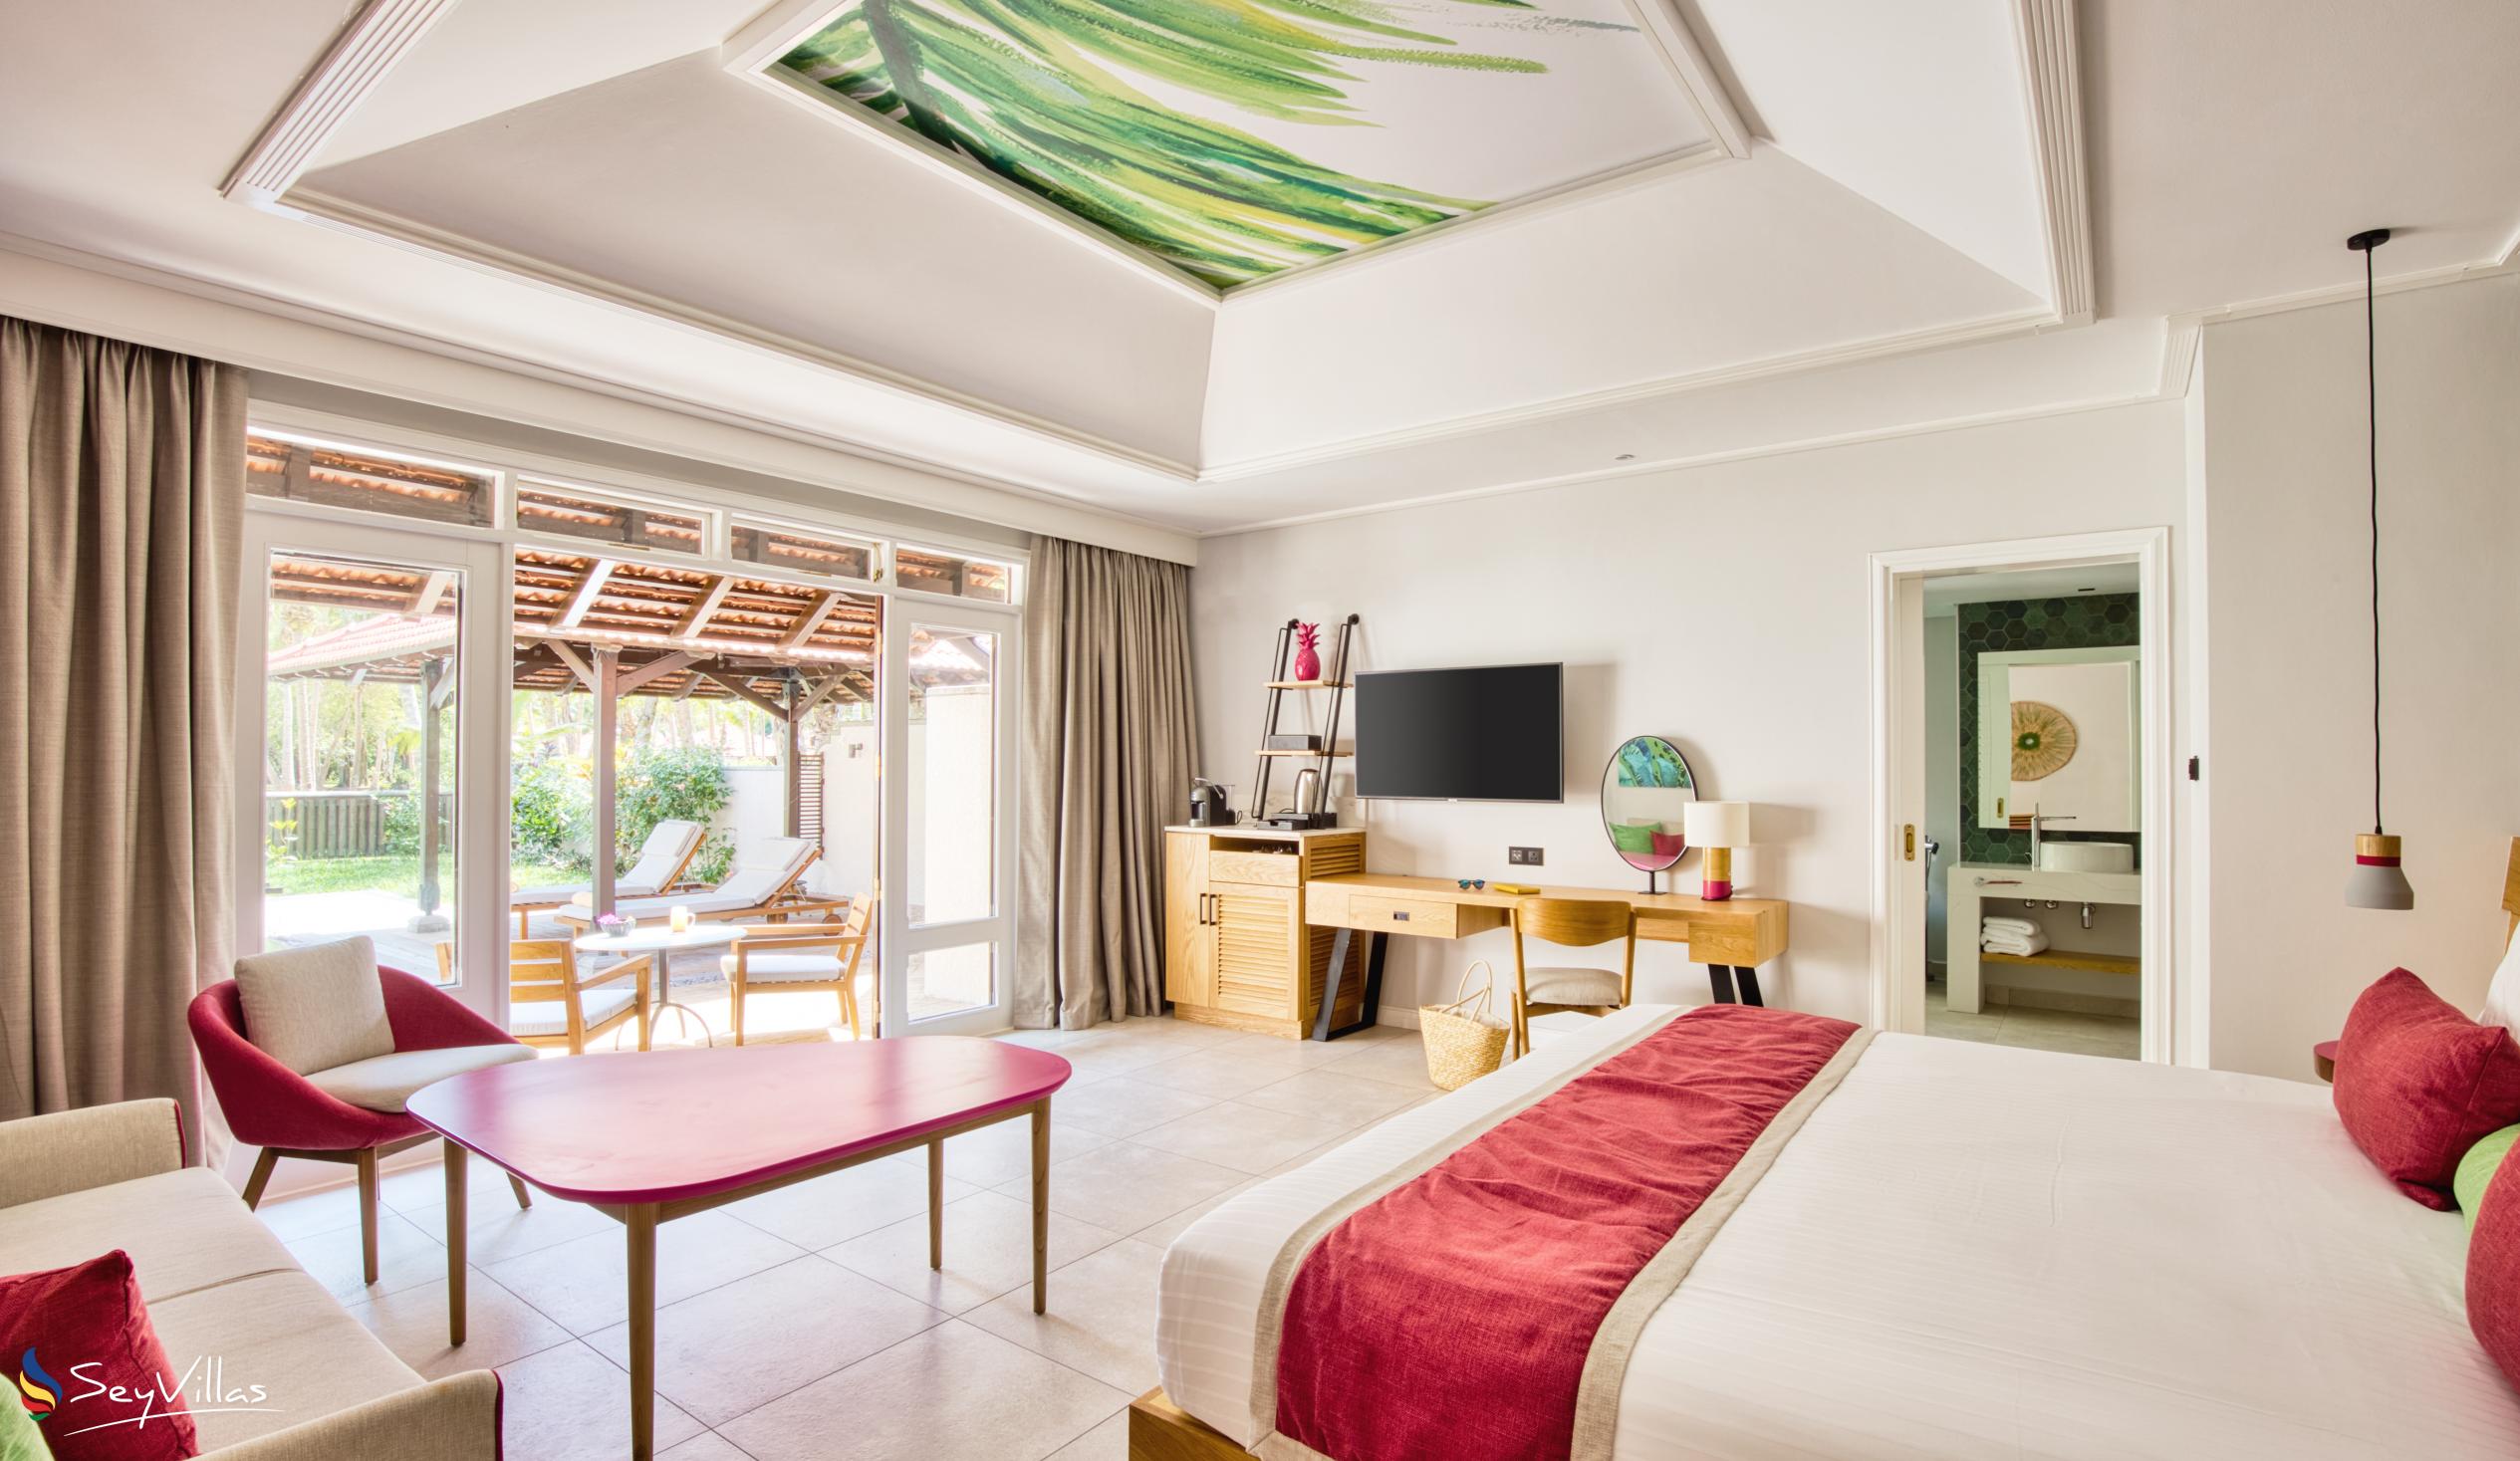 Photo 178: Club Med Seychelles - Junior Suite with Private Pool - Saint Anne (Seychelles)